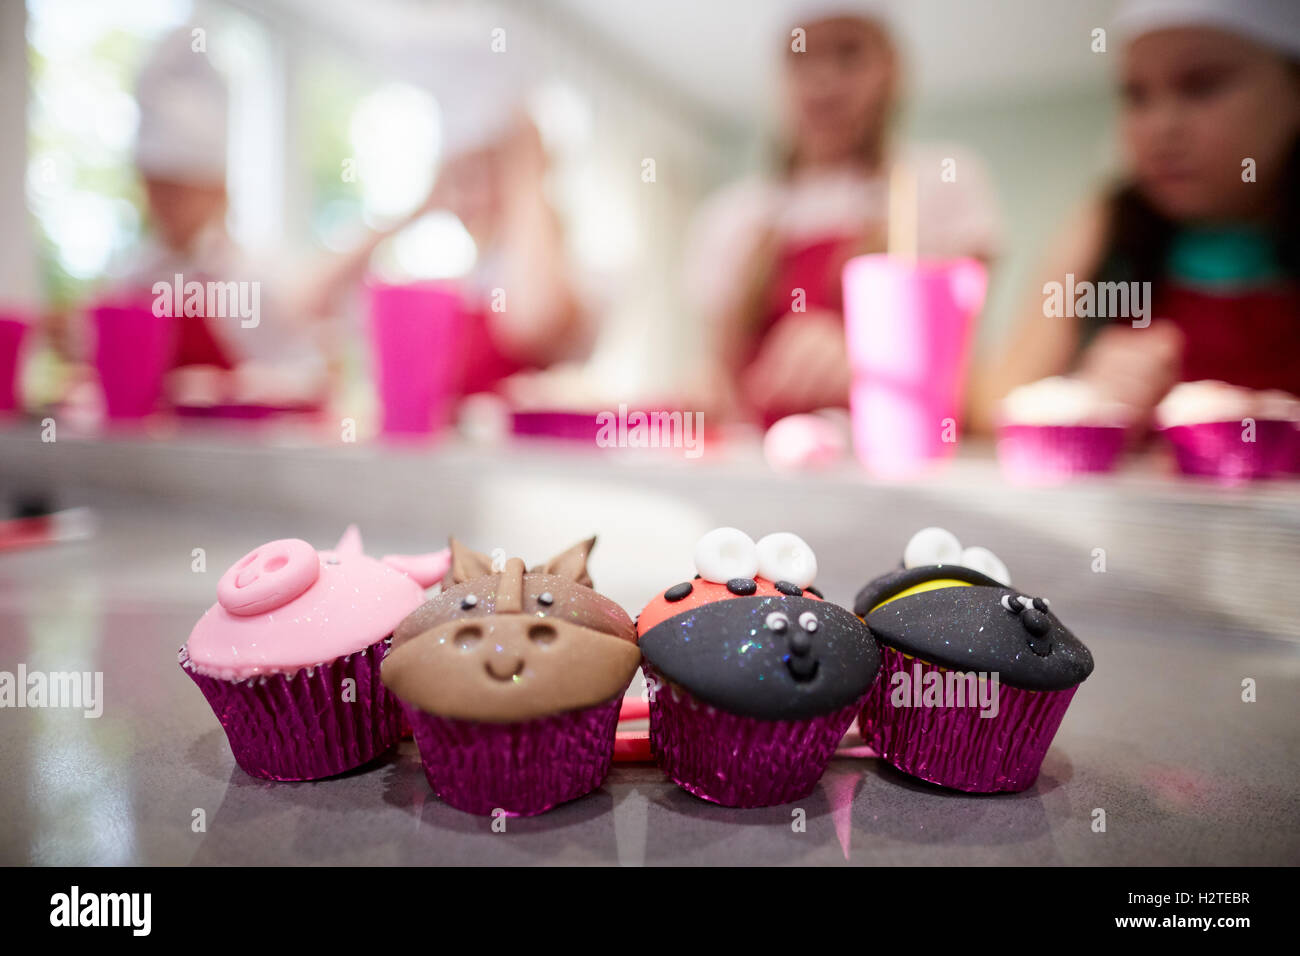 cup cakes animal faces farm   Children baking making fun cooking Young kids children youngsters child toddlers adolescents small Stock Photo